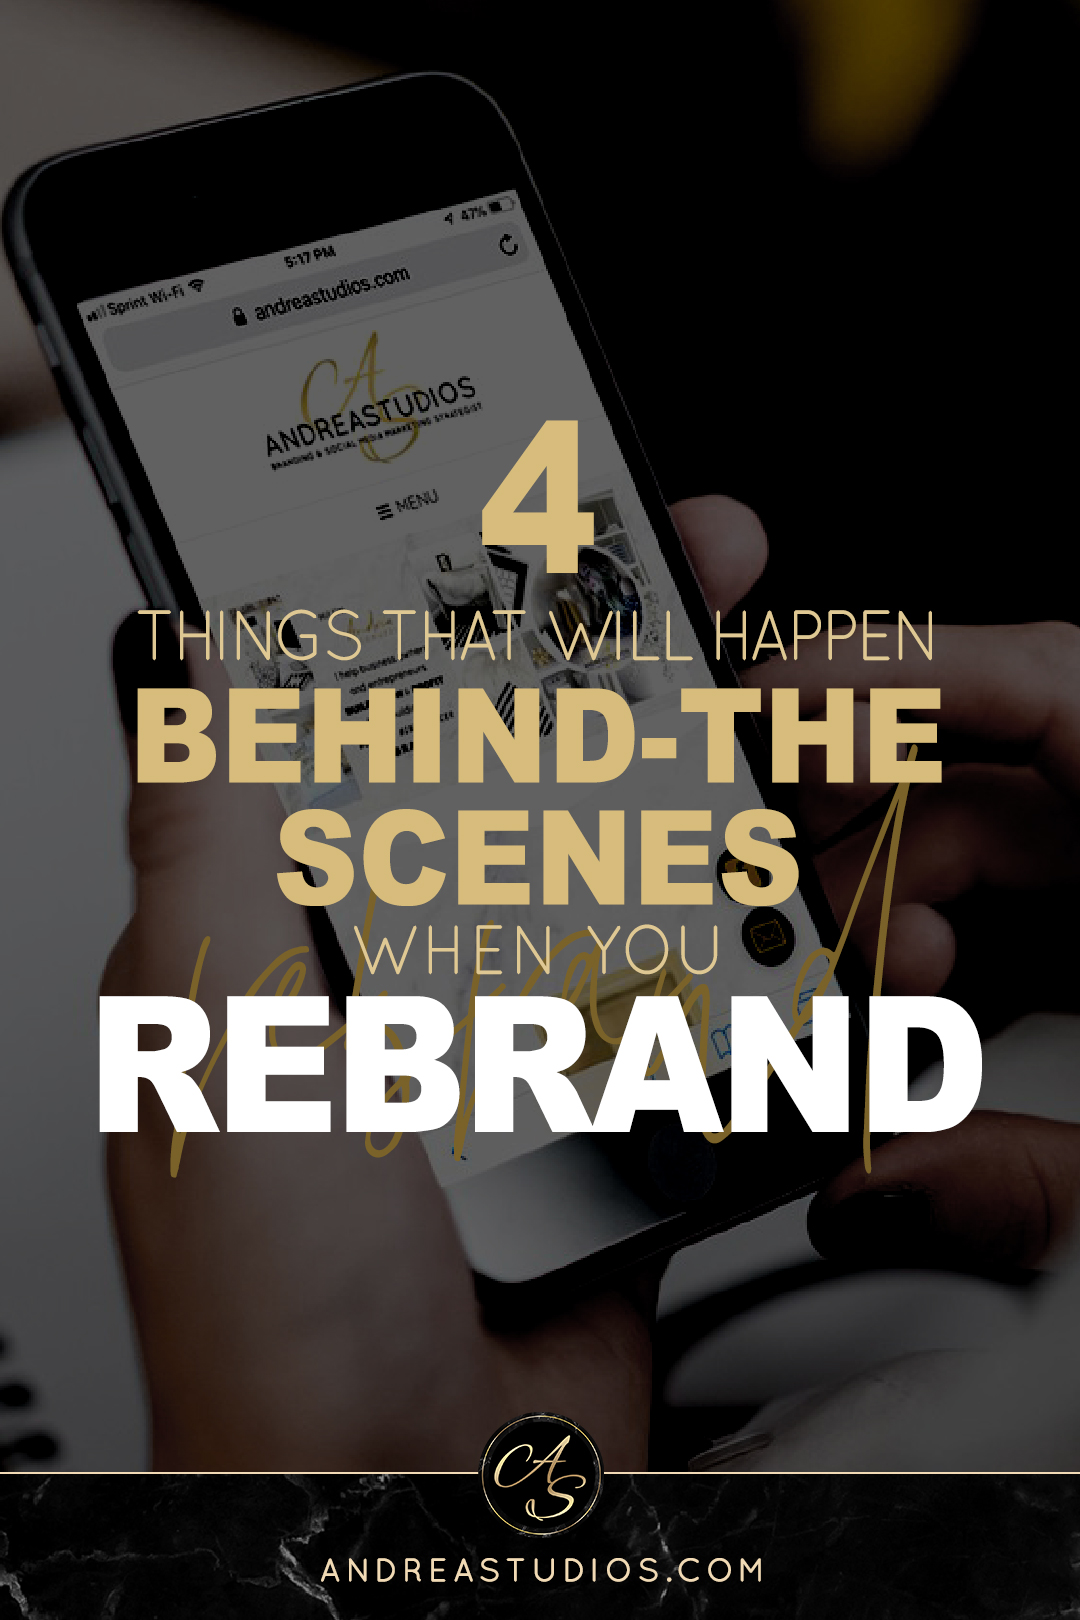 4 THINGS THAT WILL HAPPEN BEHIND-THE SCENES WHEN YOU REBRAND